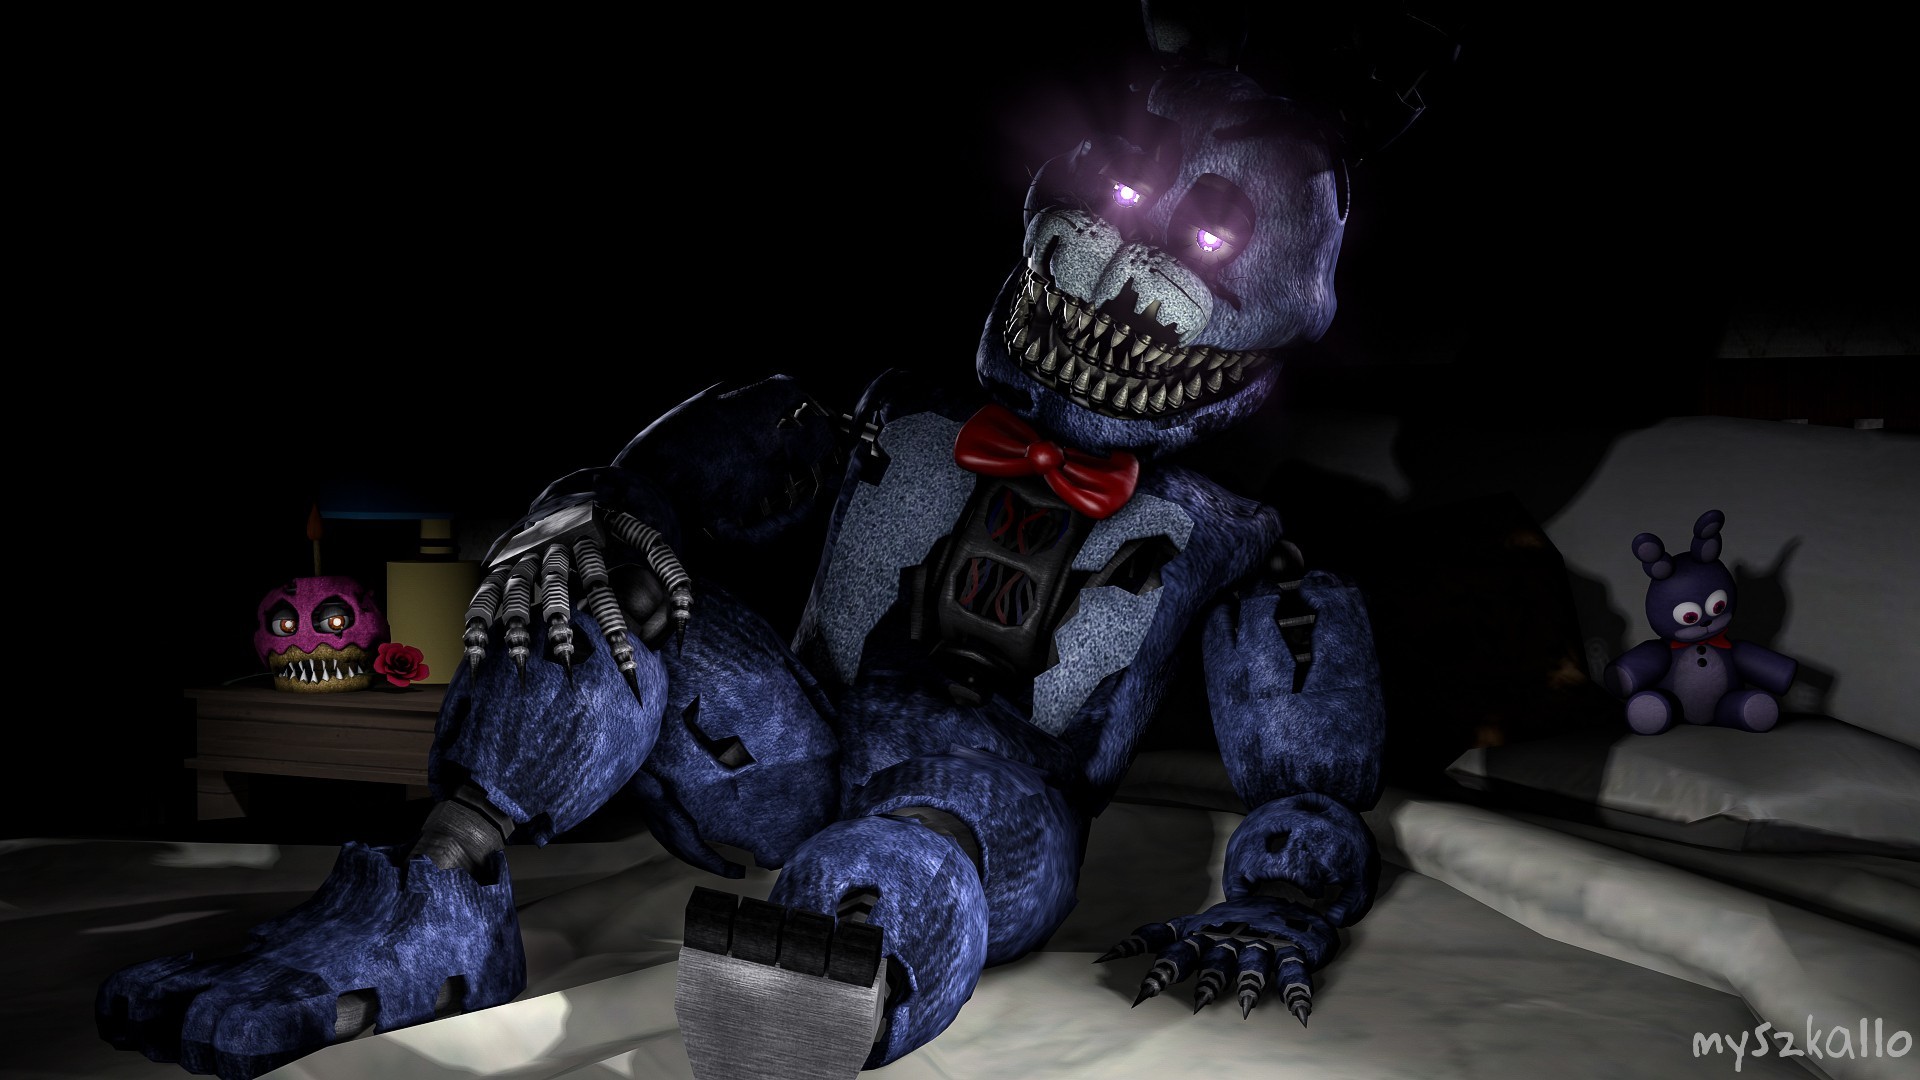 Your own Nightmare SFM Wallpaper by myszka11o